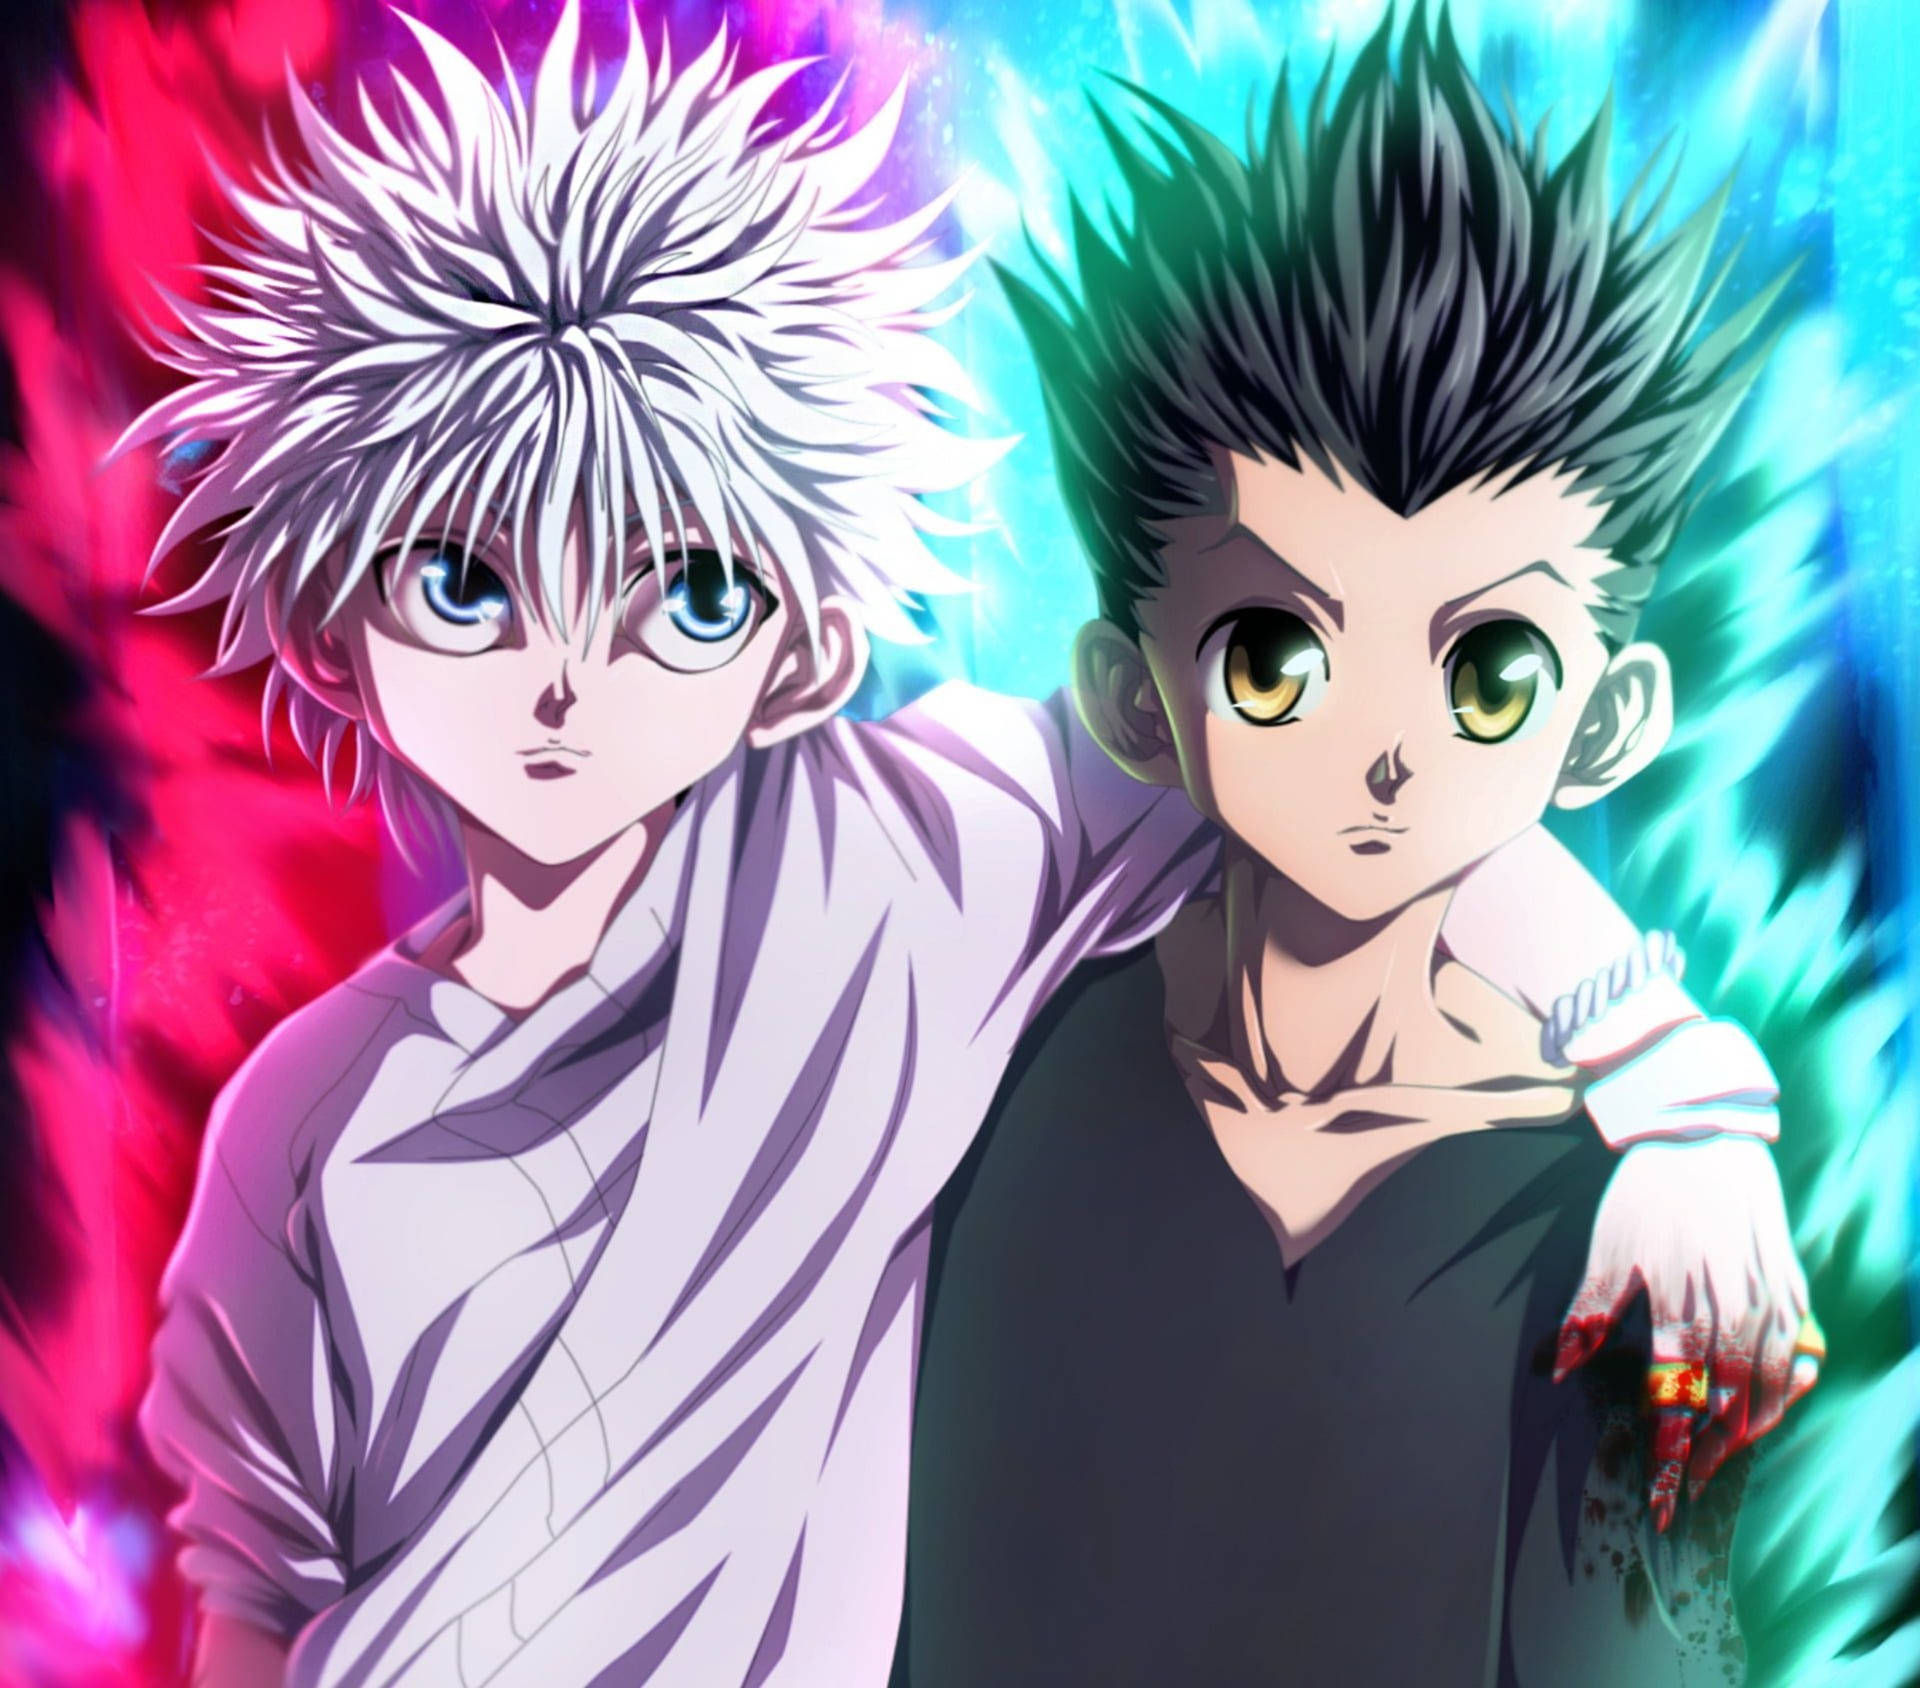 Follow Gon Freecss in his epic journey for a better tomorrow in the anime classic 'Hunter x Hunter' Wallpaper